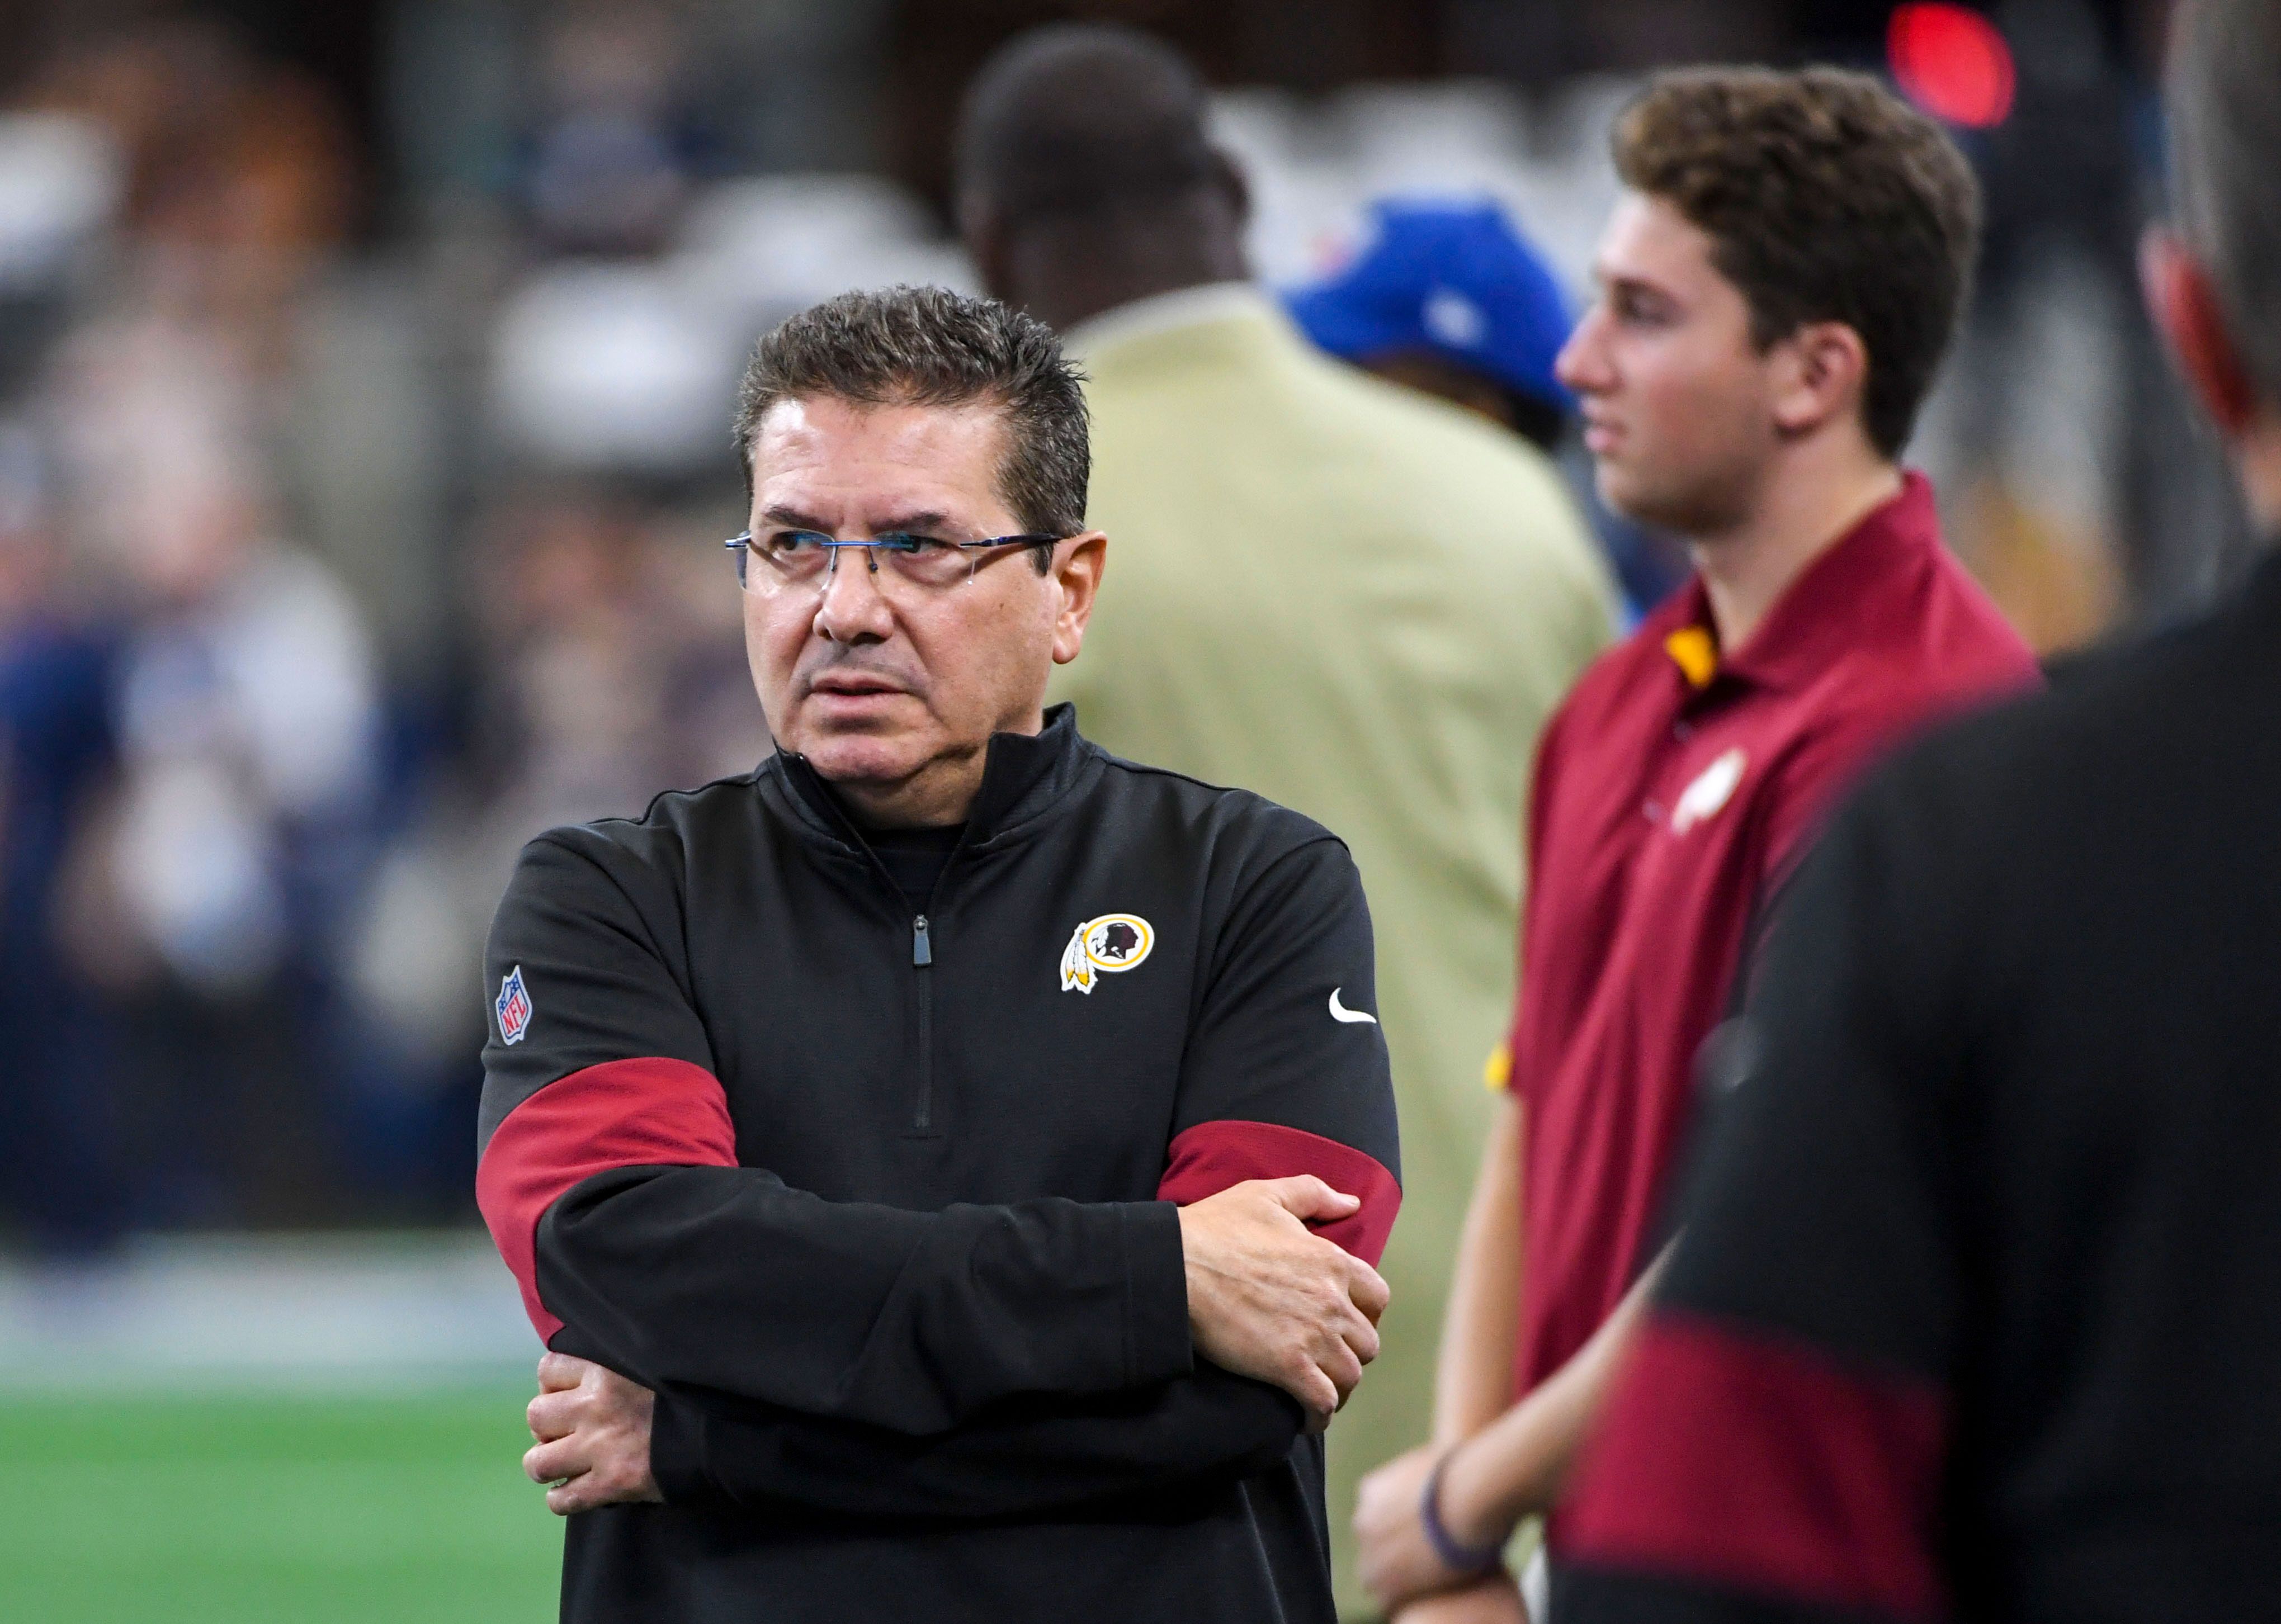 The Washington Commanders Played A Football Game And Dan Snyder